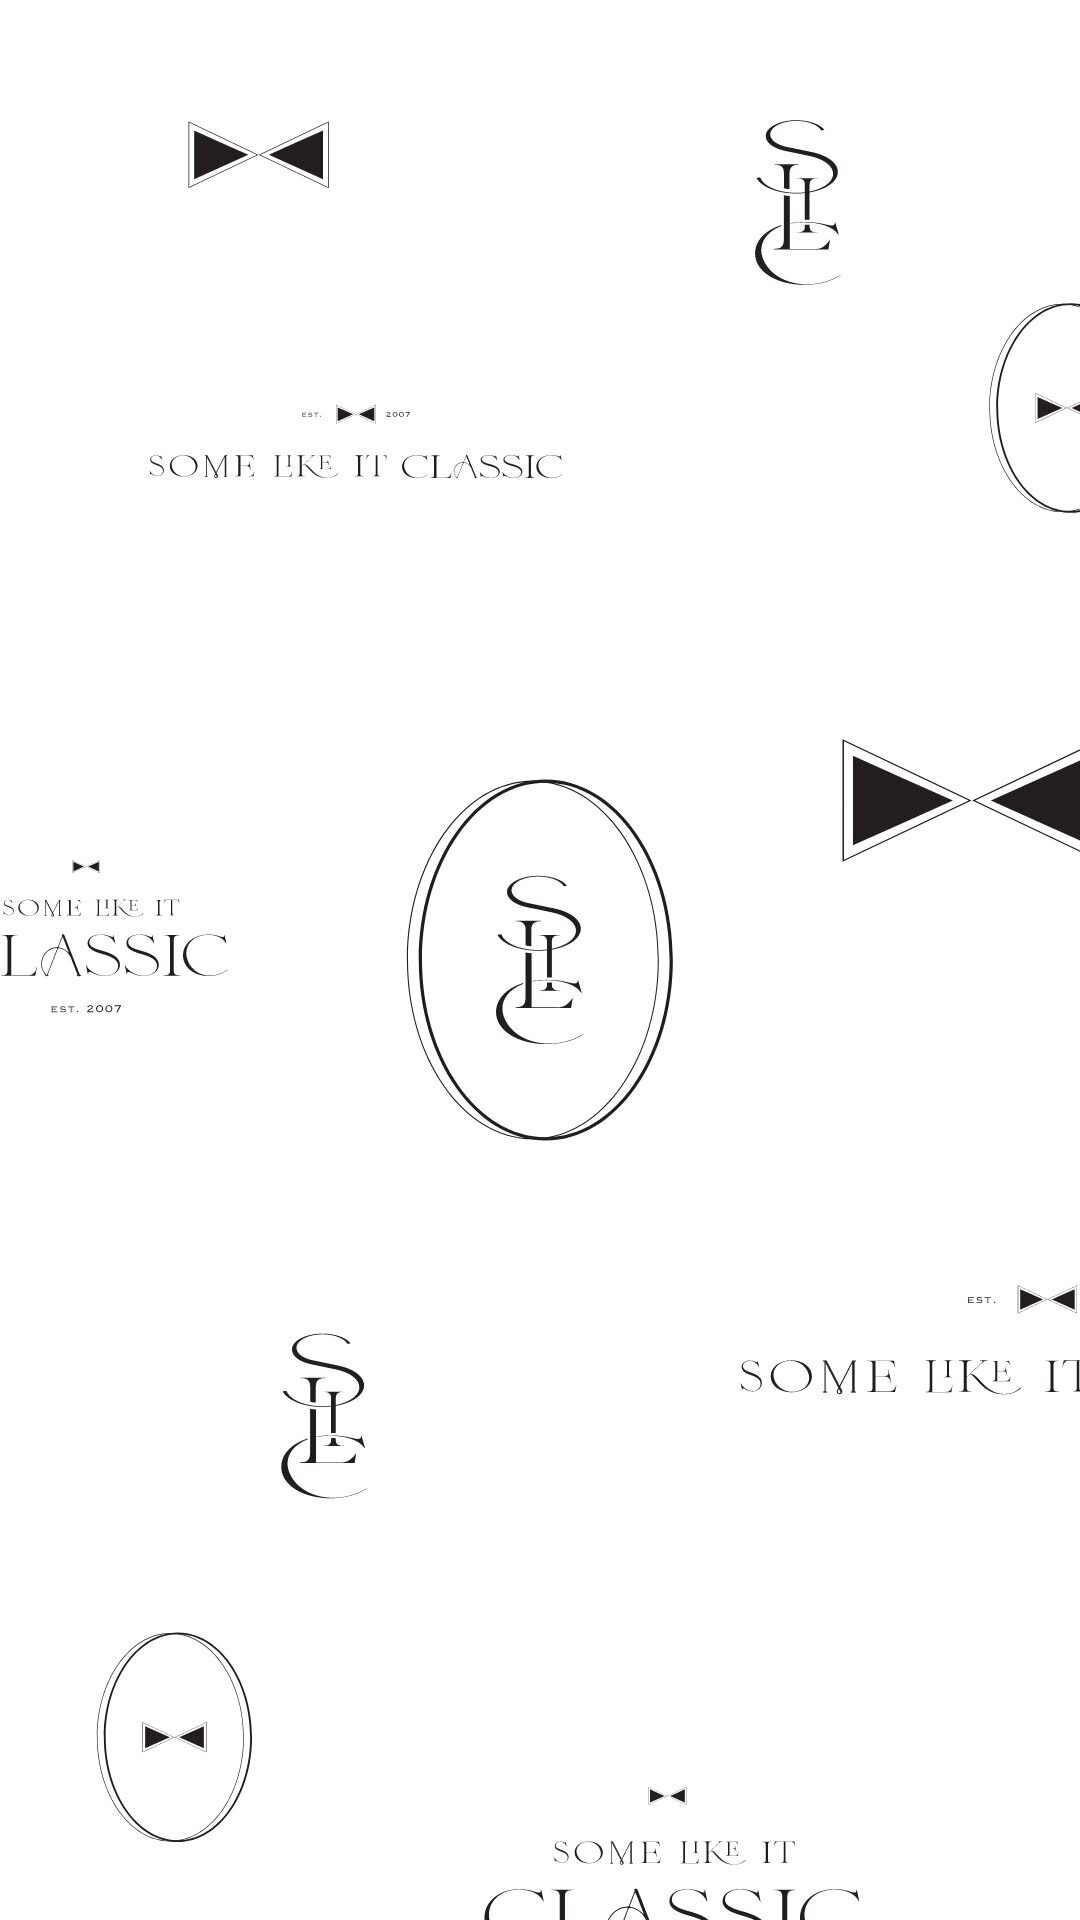 Foil & Ink branding & web design for Some like it classic (4)